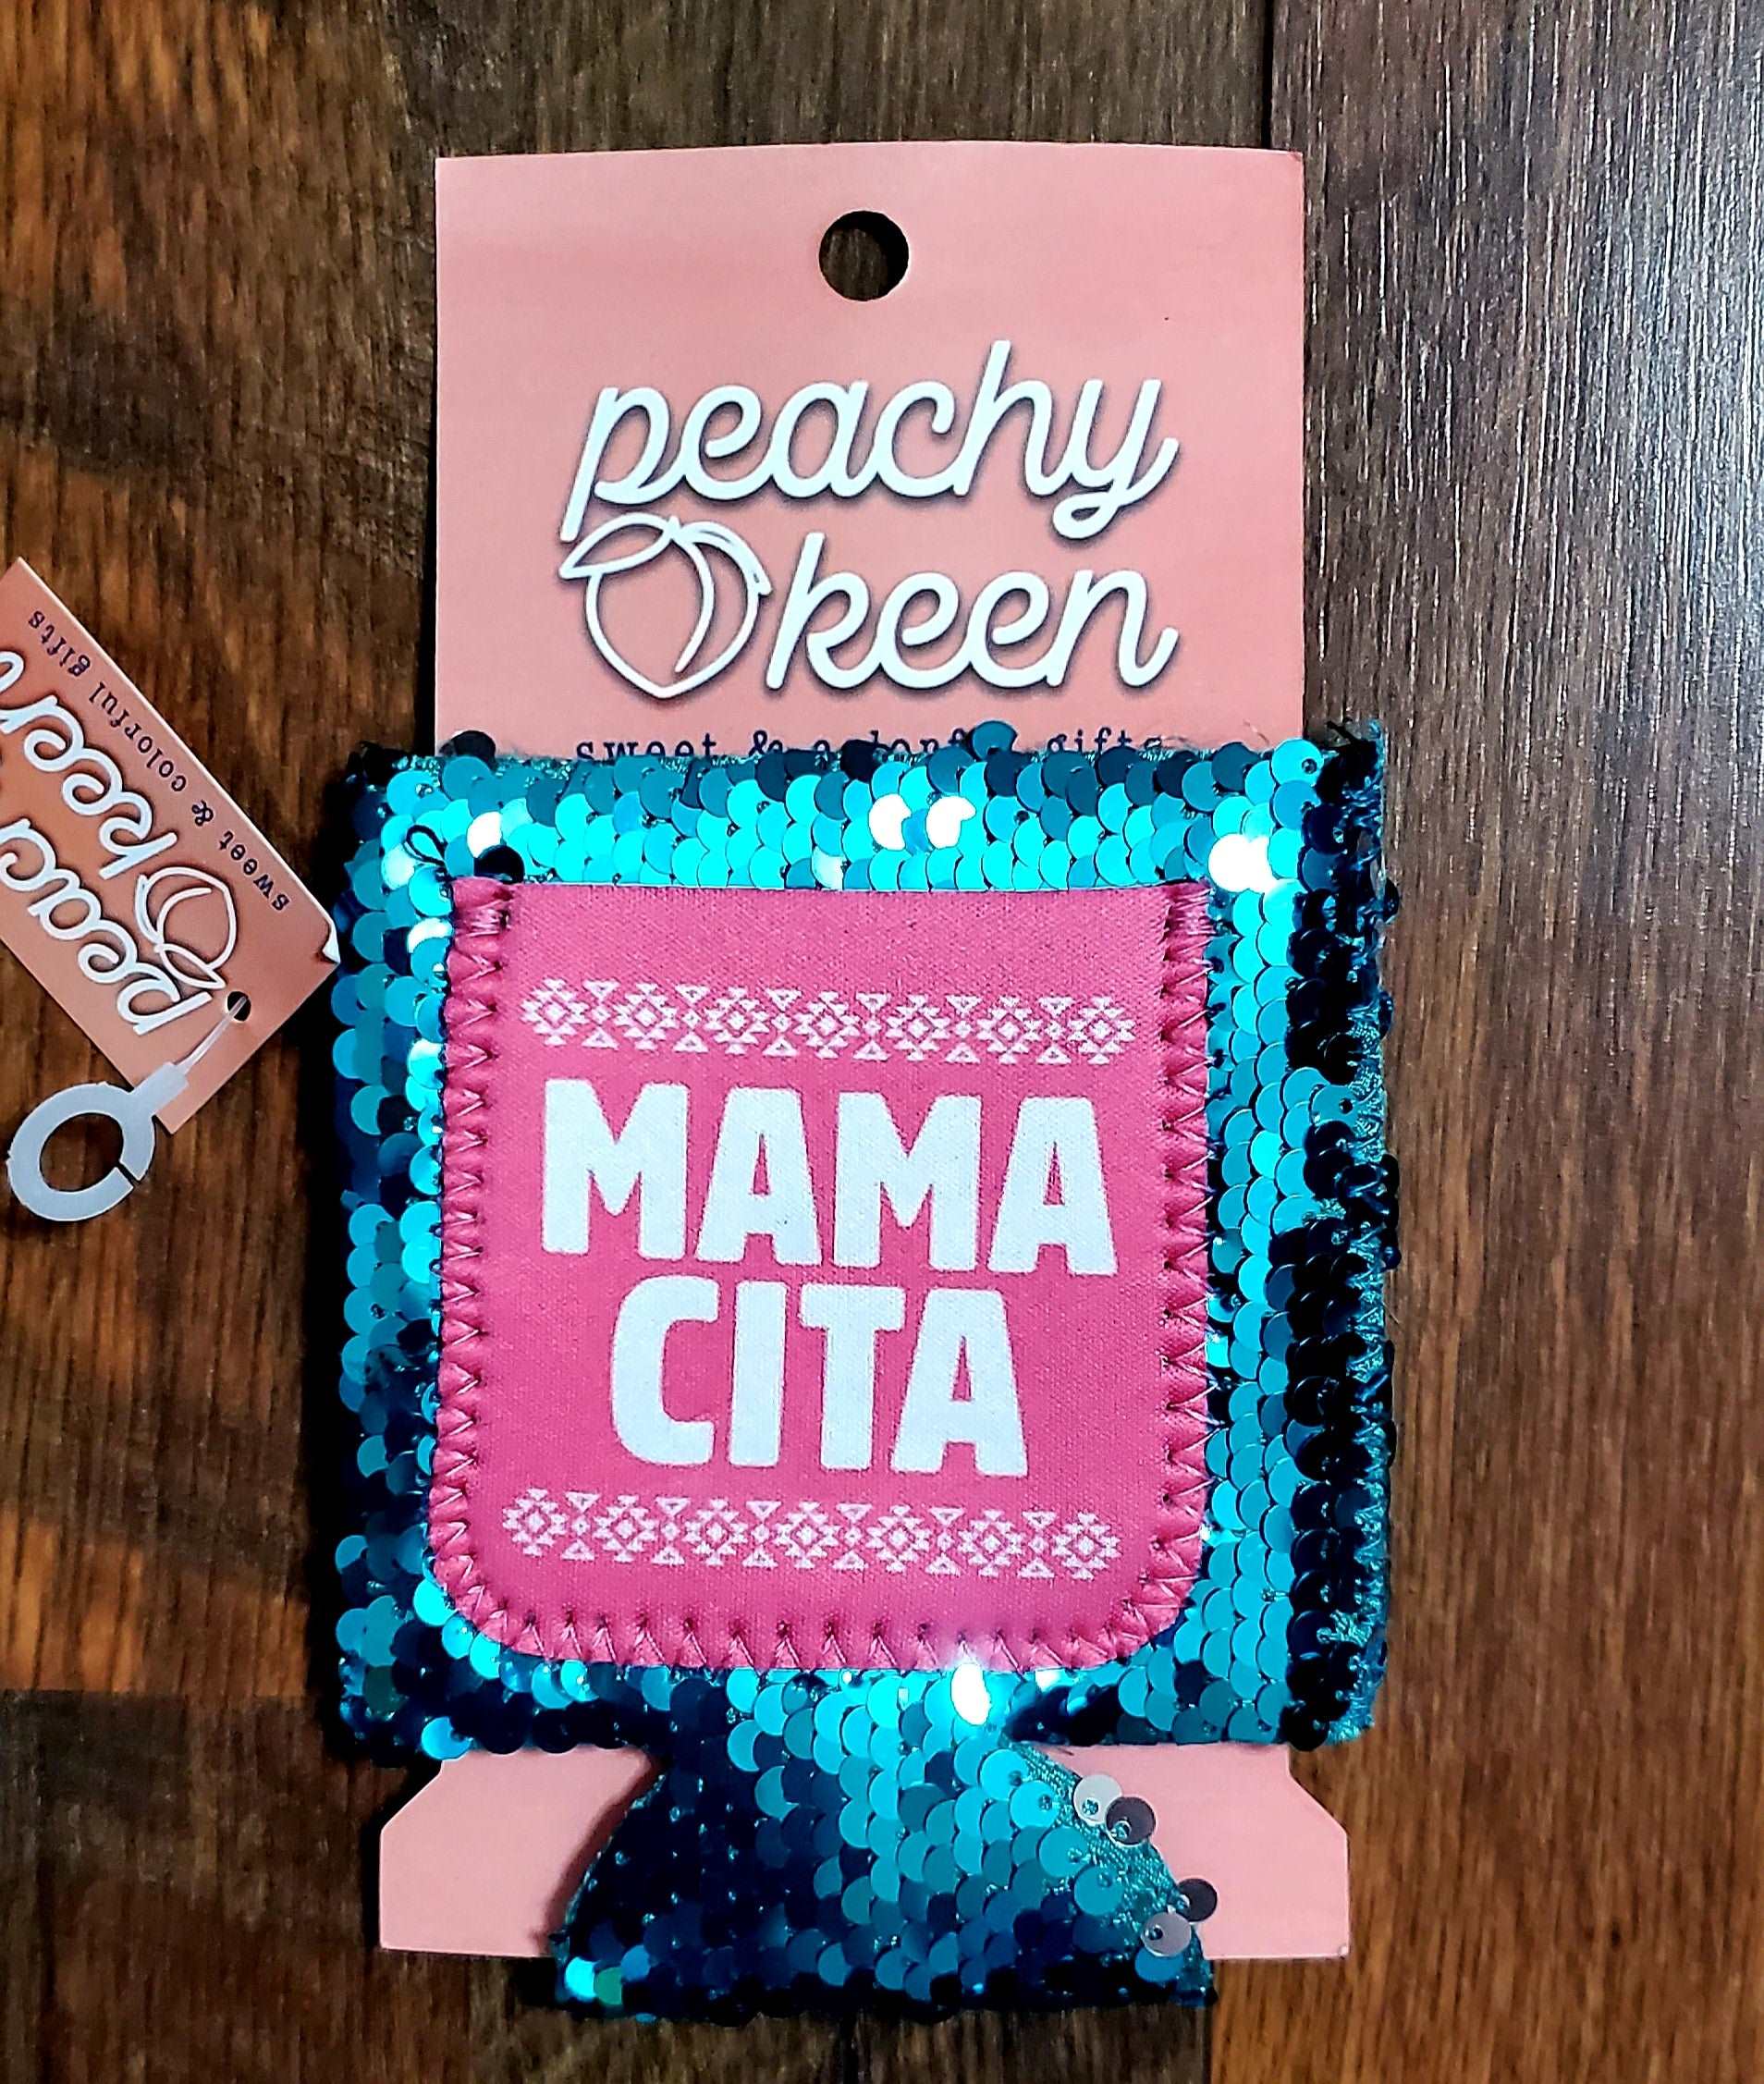 Teal sequin can cooler with Mamacita on it.